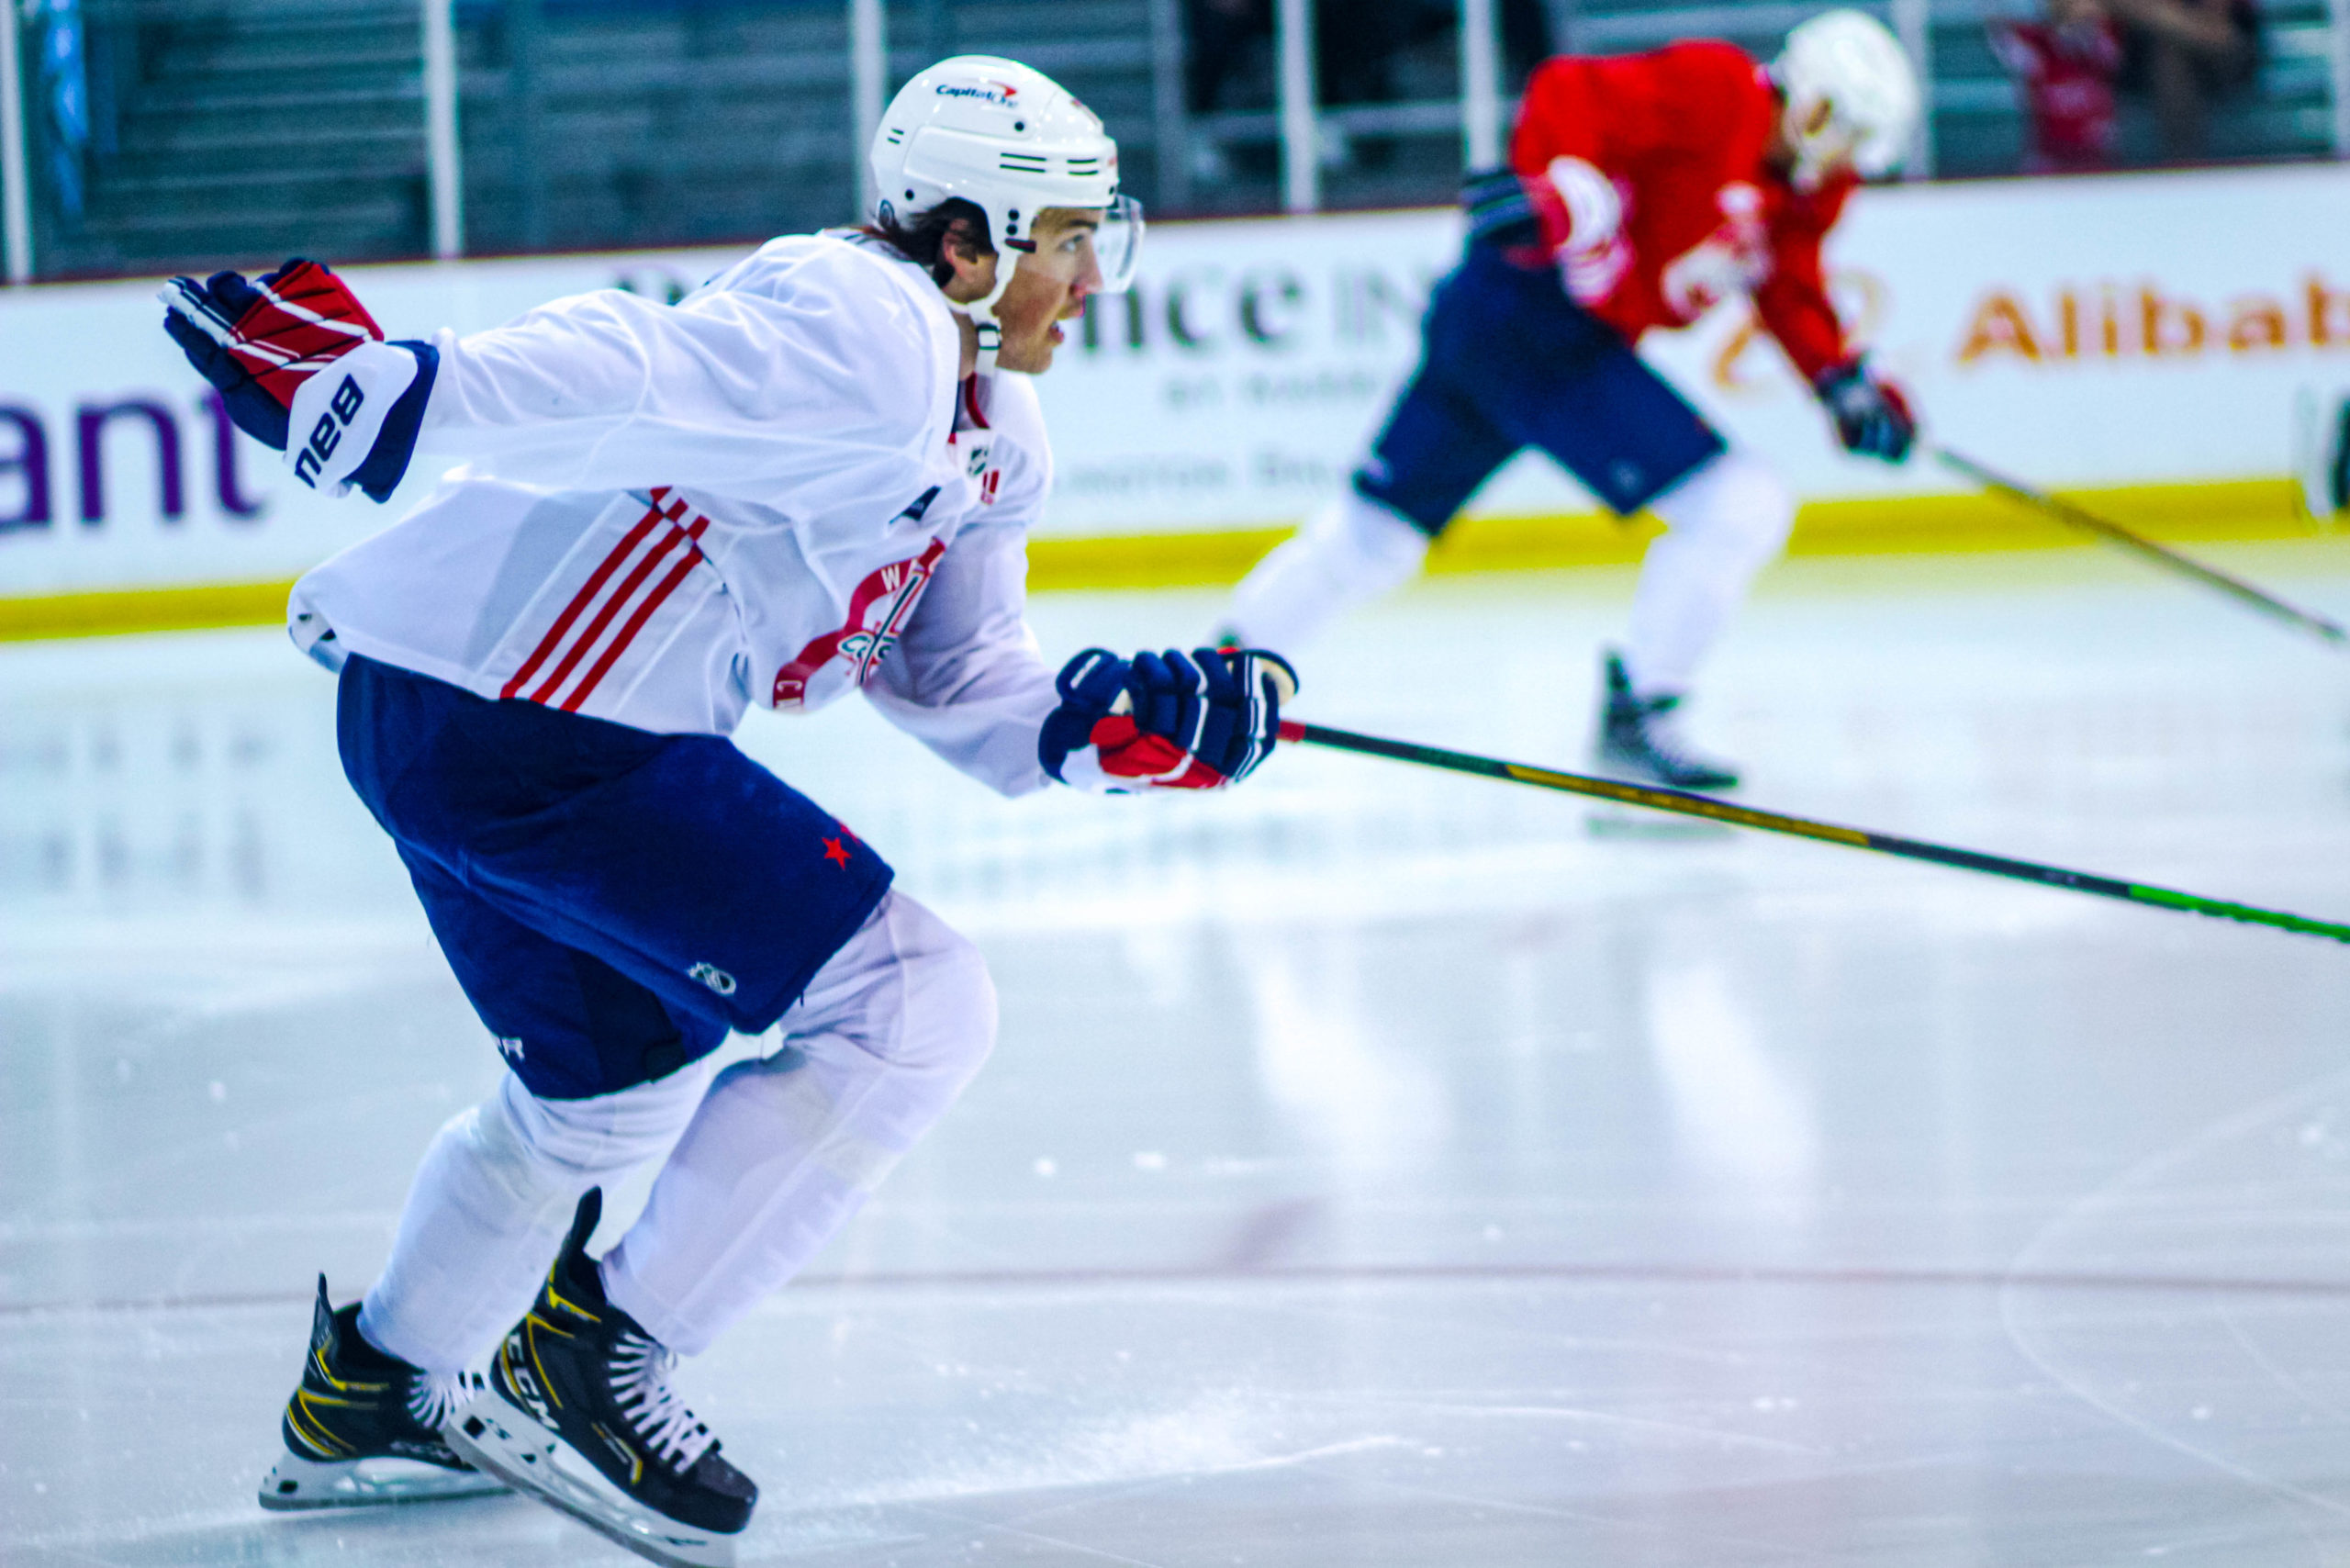 The Capitals took part in their famous skate test.